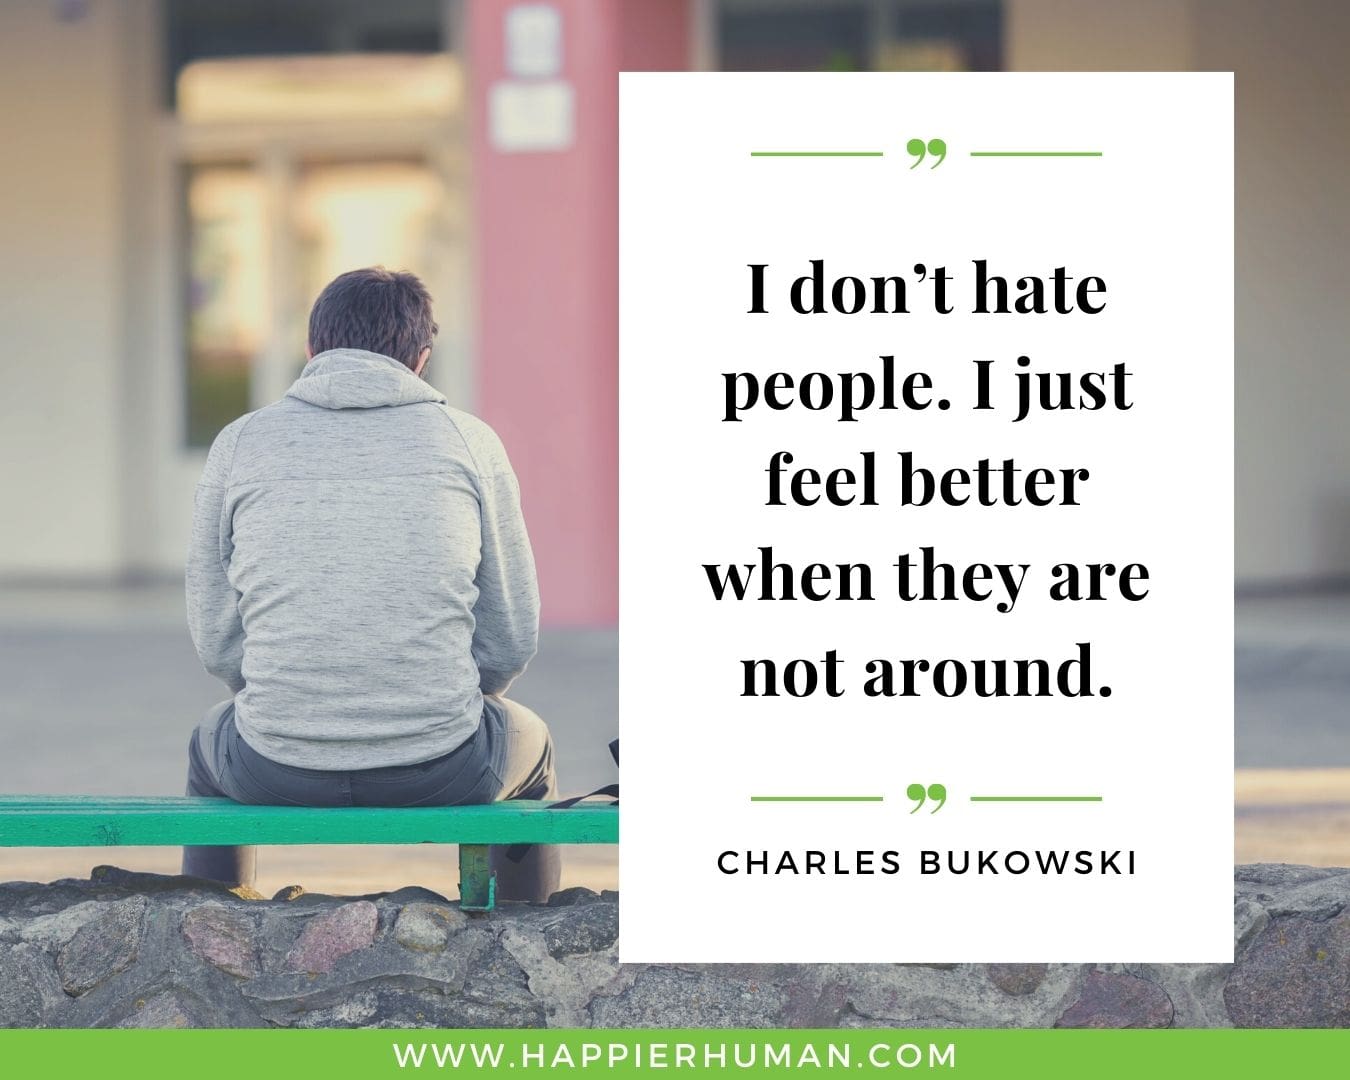 Introvert Quotes - “I don’t hate people. I just feel better when they are not around.” – Charles Bukowski